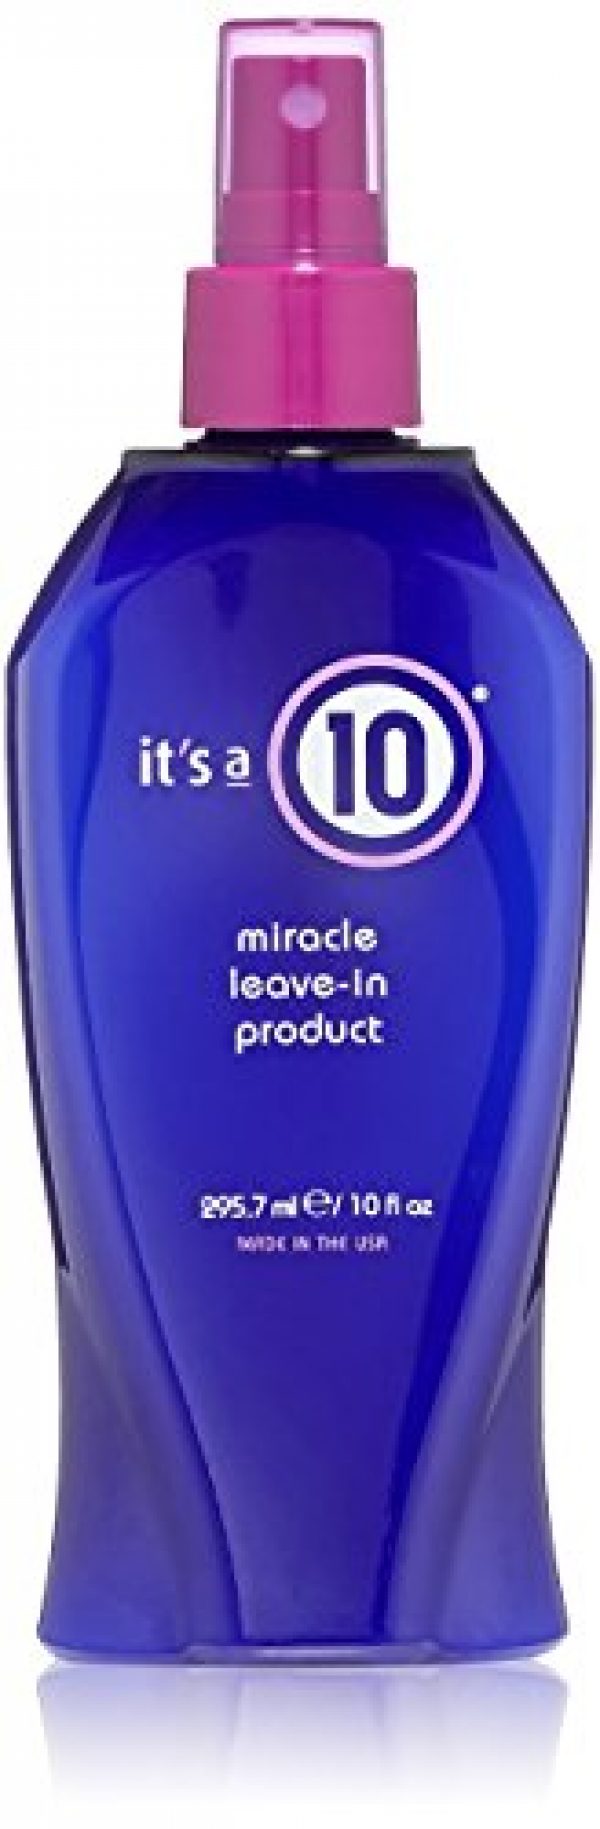 It's A 10 Haircare Miracle Leave-In Conditioner Spray - 10 oz. - 1ct 11